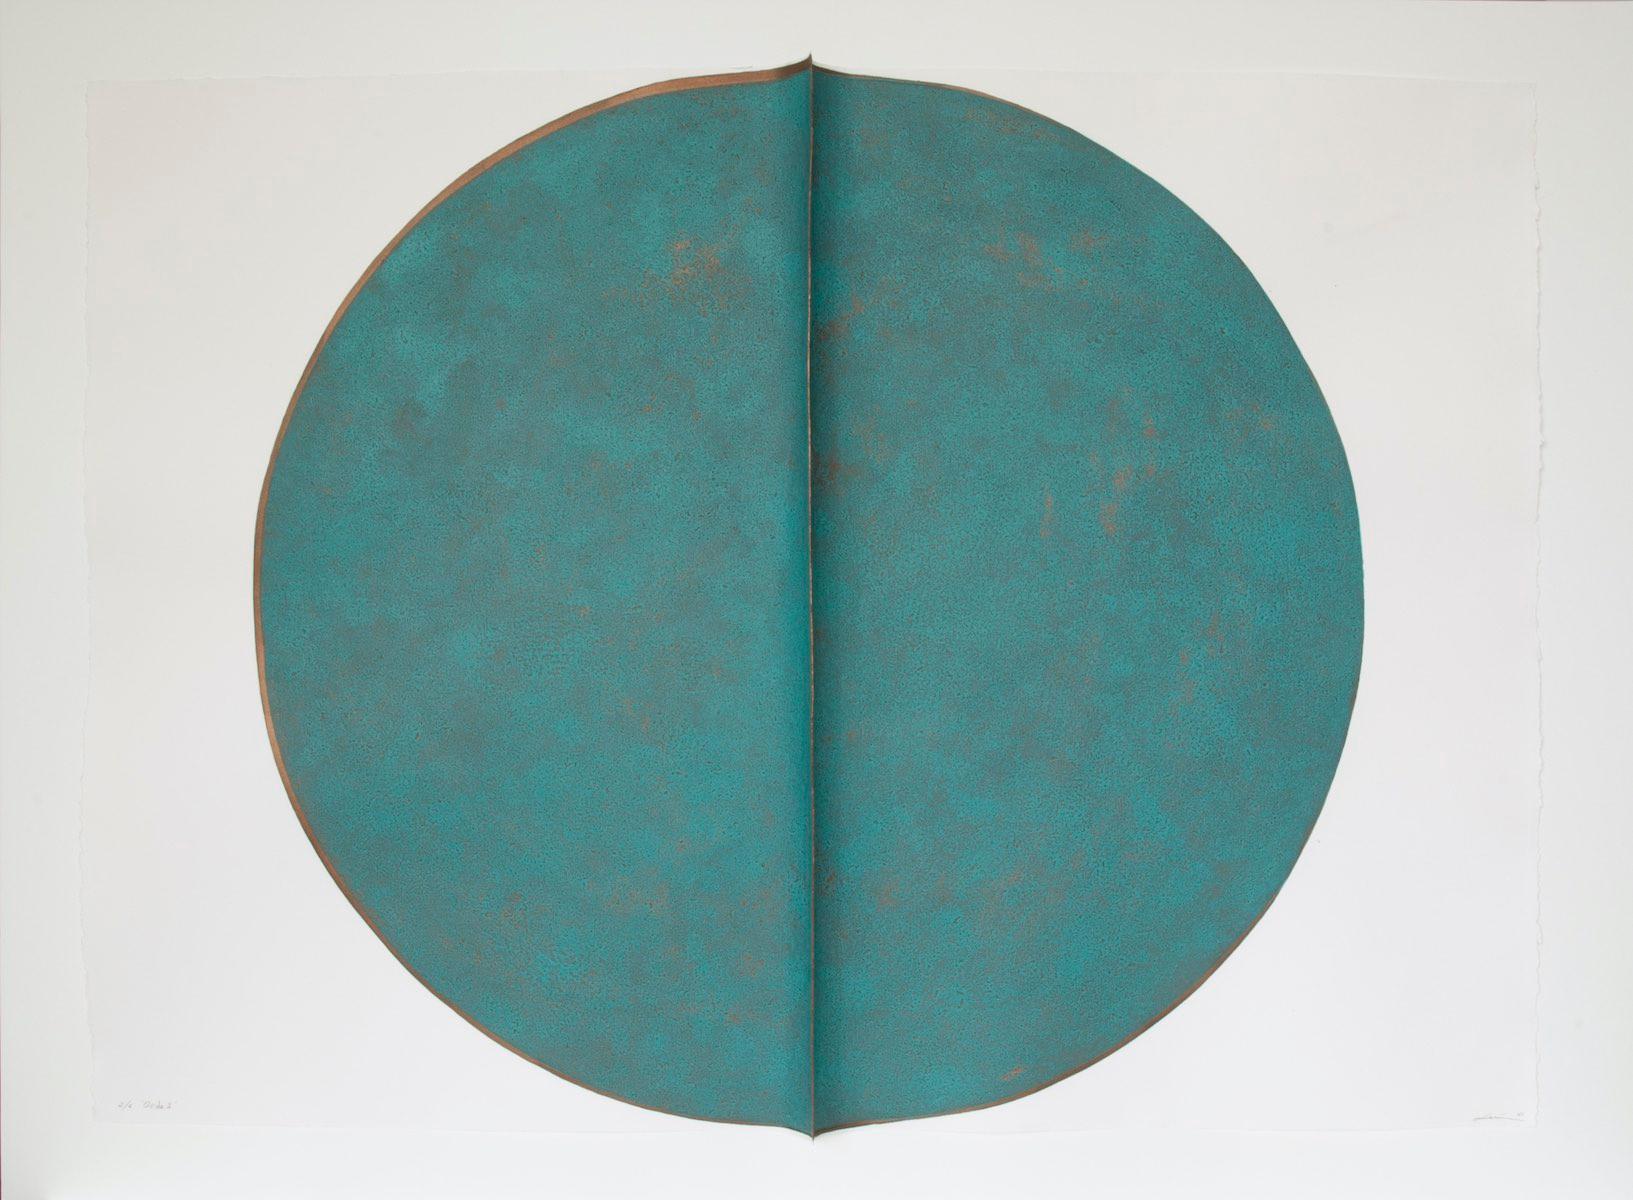 Oxide I: Large, Round, Green and Copper Editioned Collagraph by Silvia Lerin